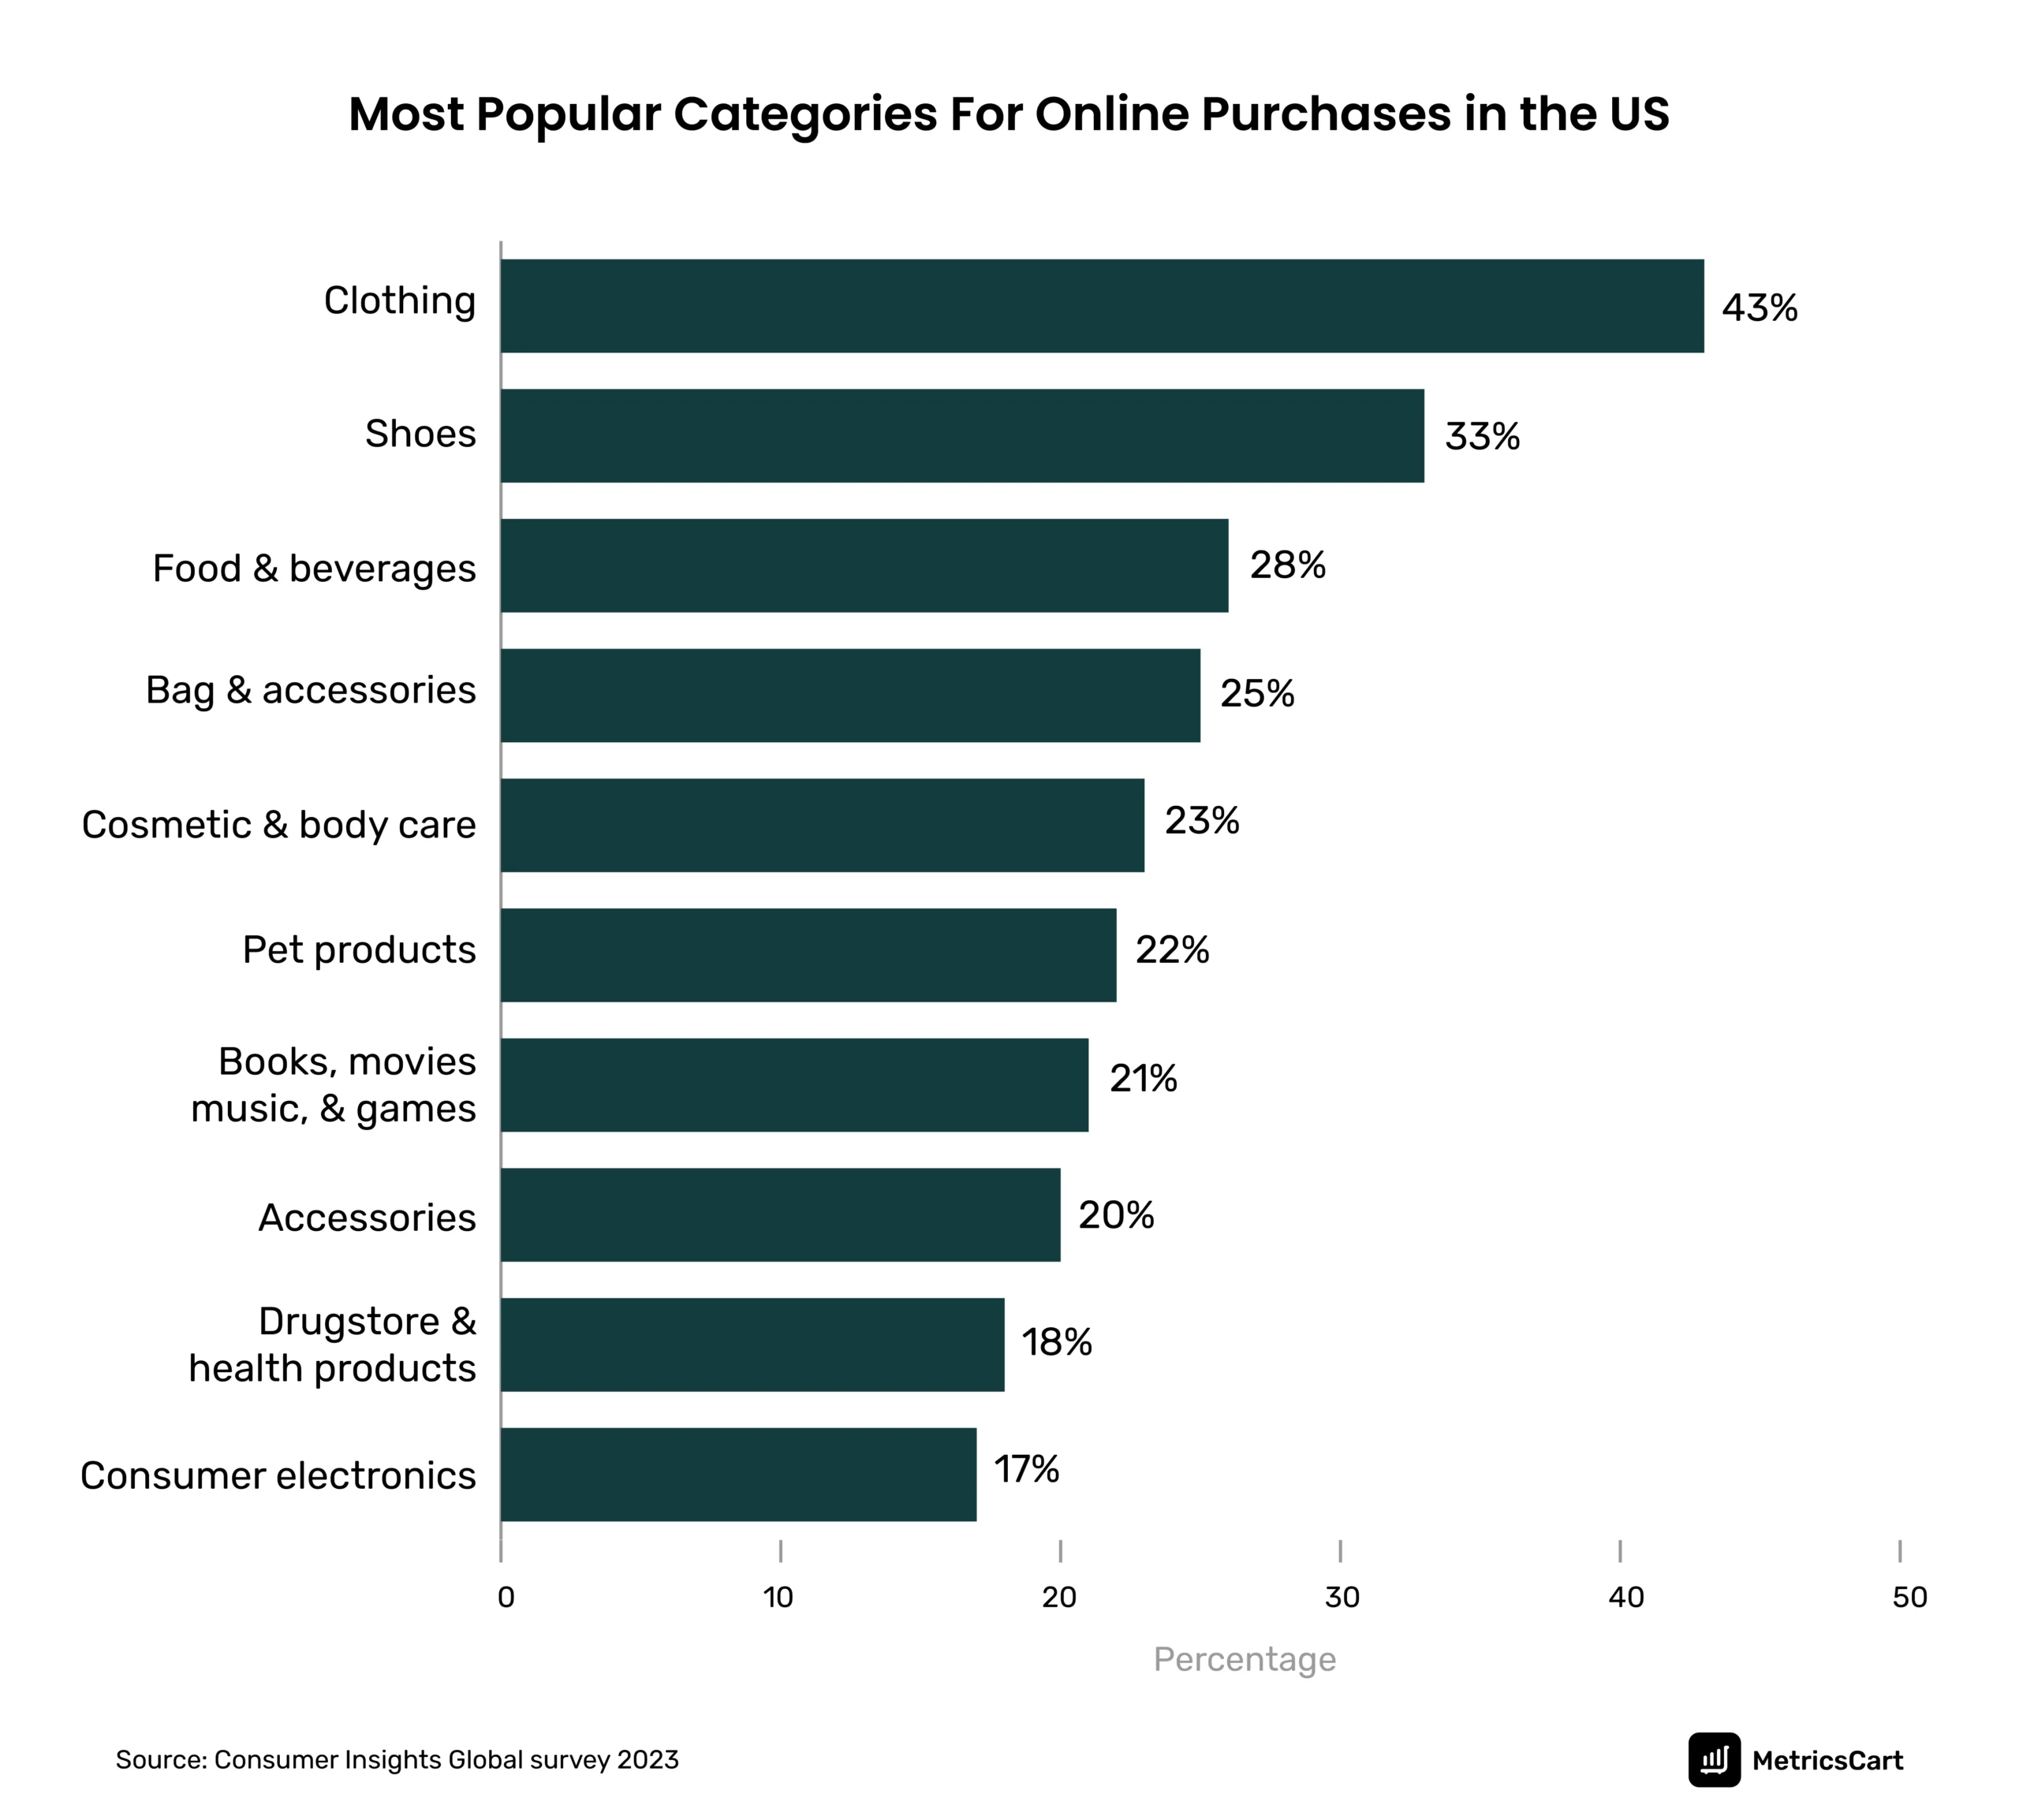 the graph shows the popular categories for online purchases in the US